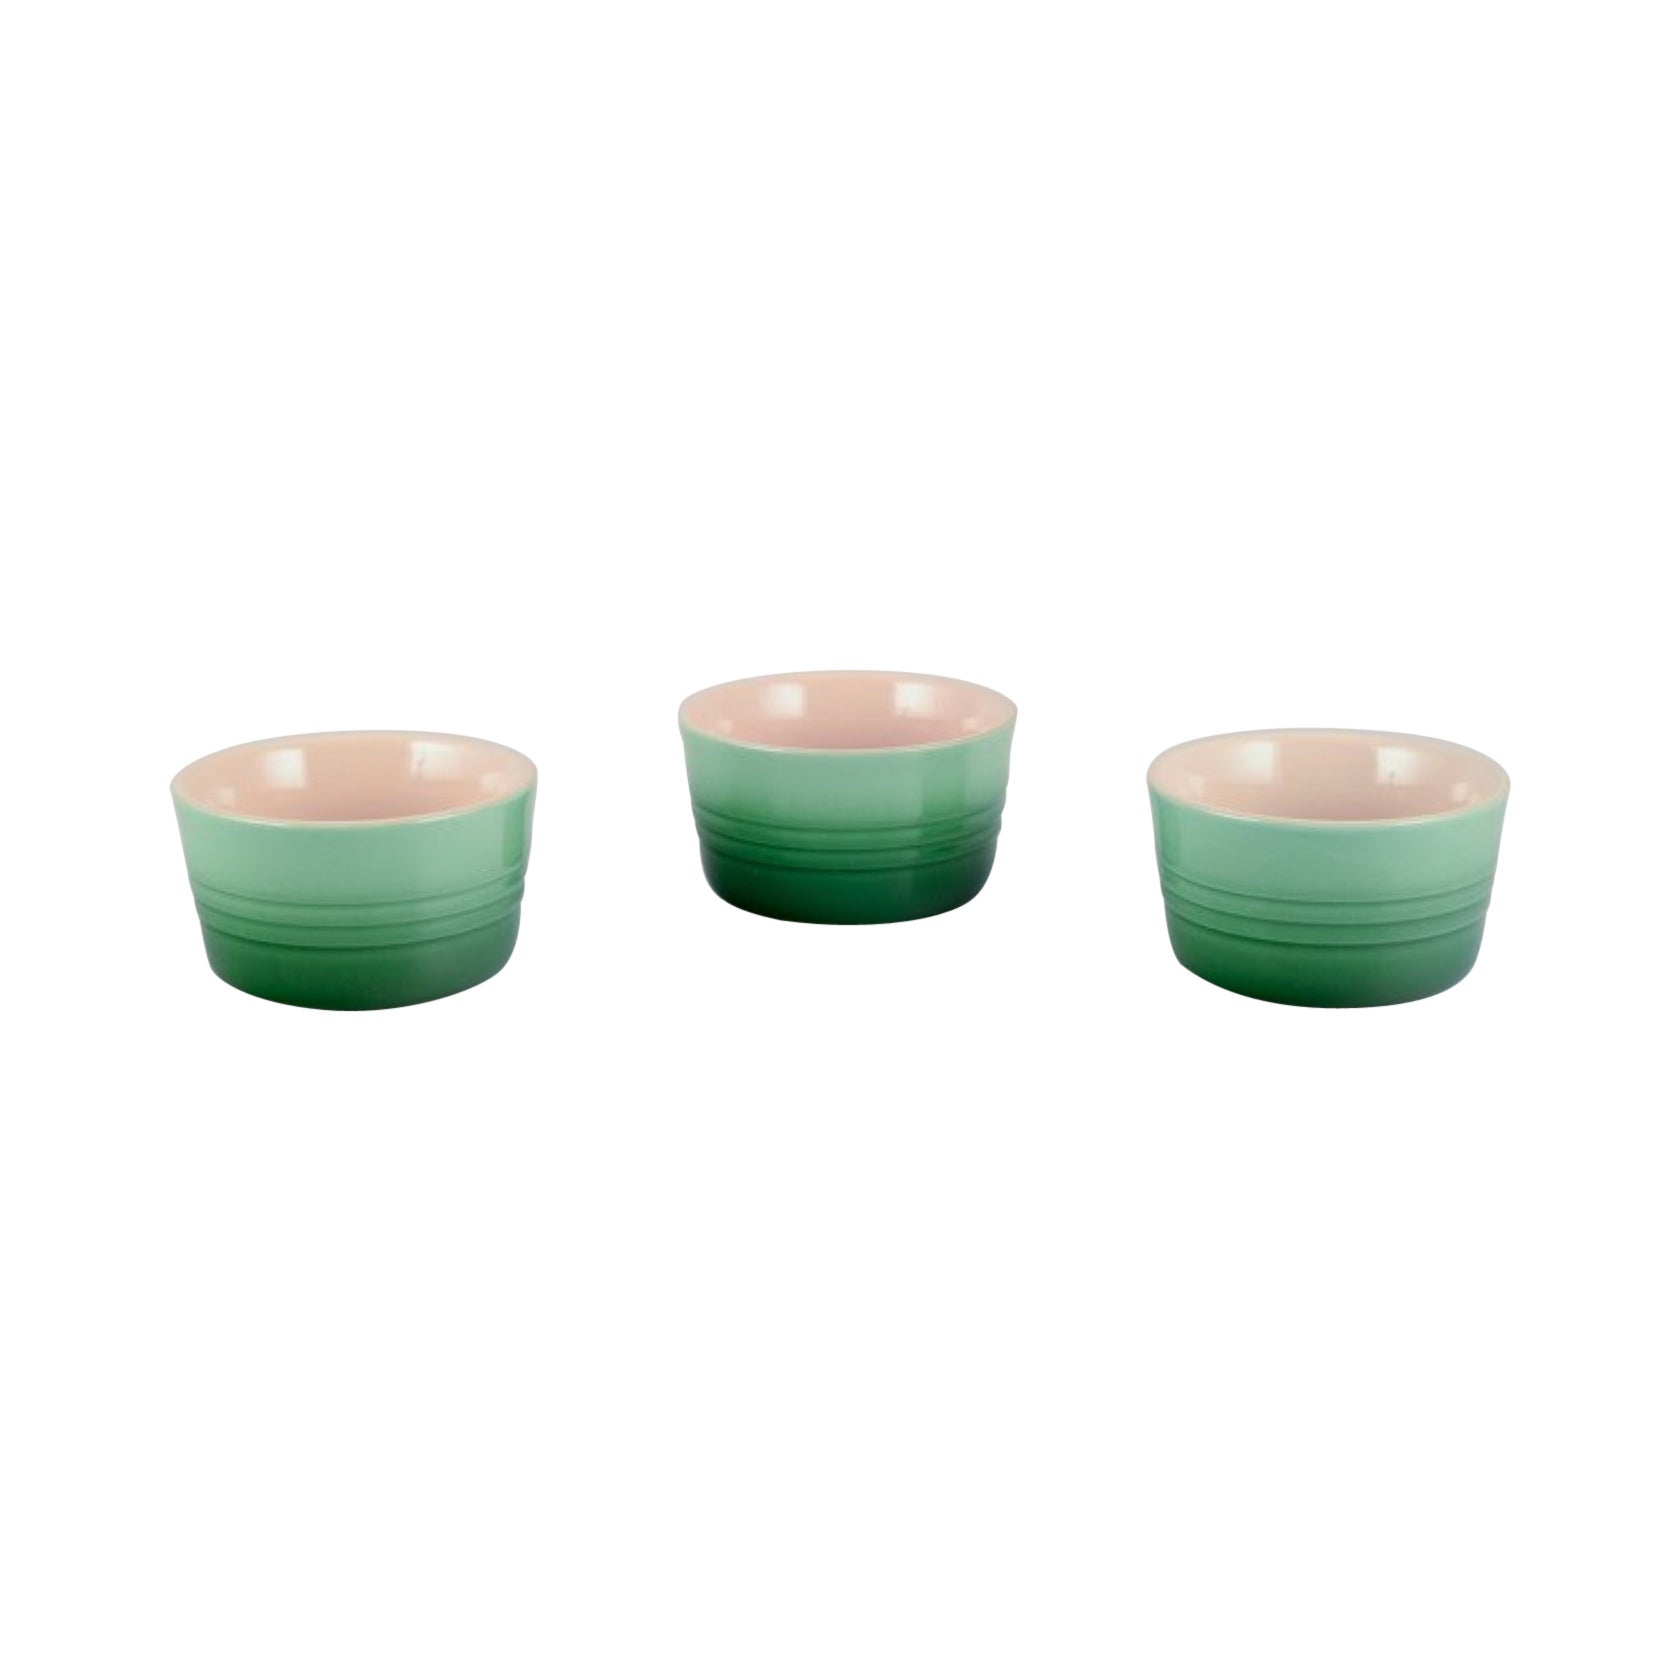 Le Creuset, France. Three green stoneware pie dishes with hand-glazed finish.  For Sale